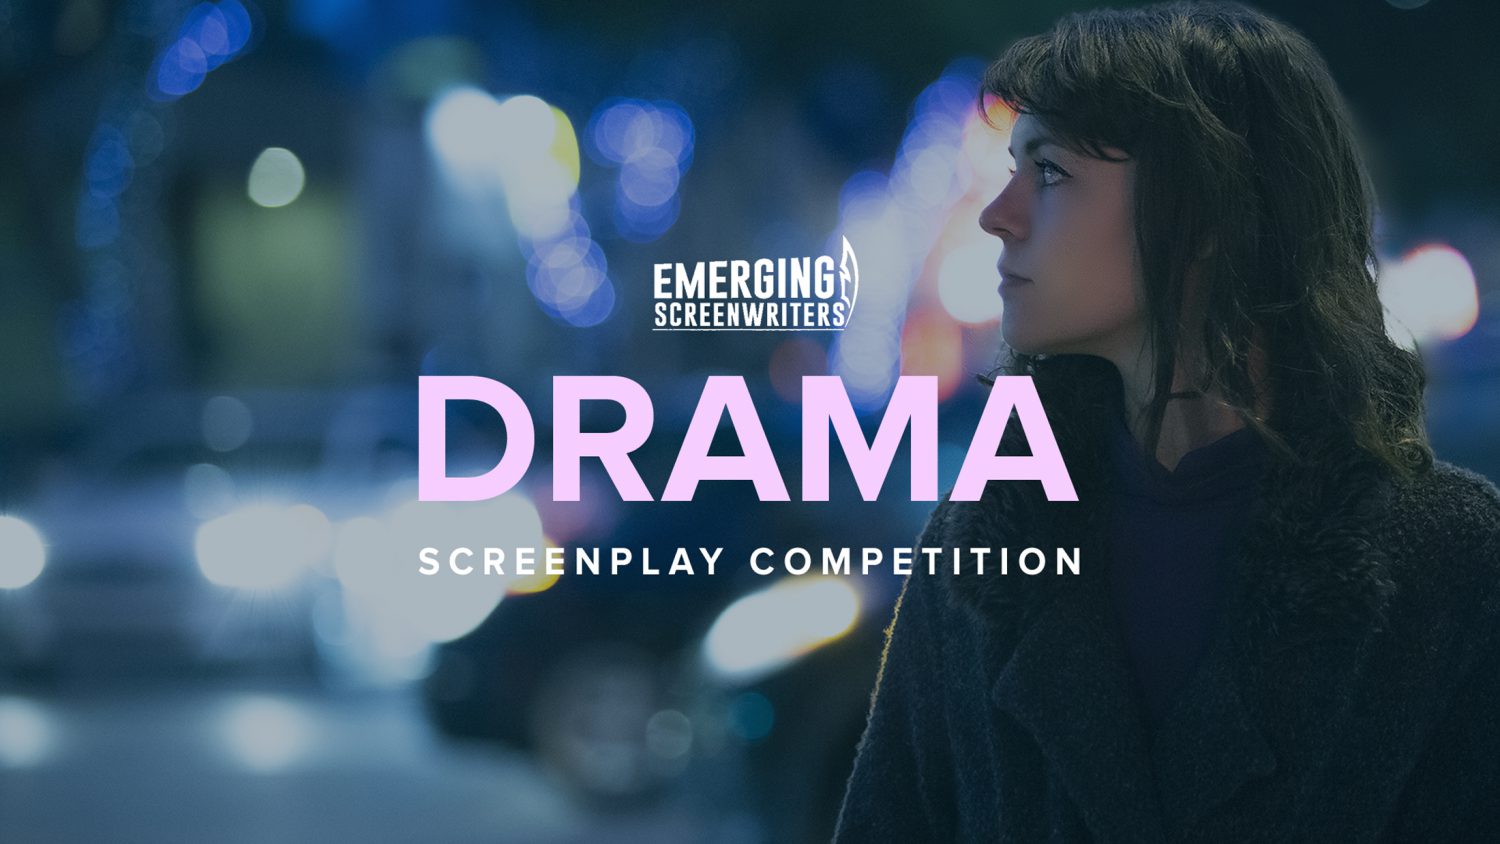 INCARNATIONS Named Quarterfinalist for Emerging Screenwriters Drama Screenplay Competition